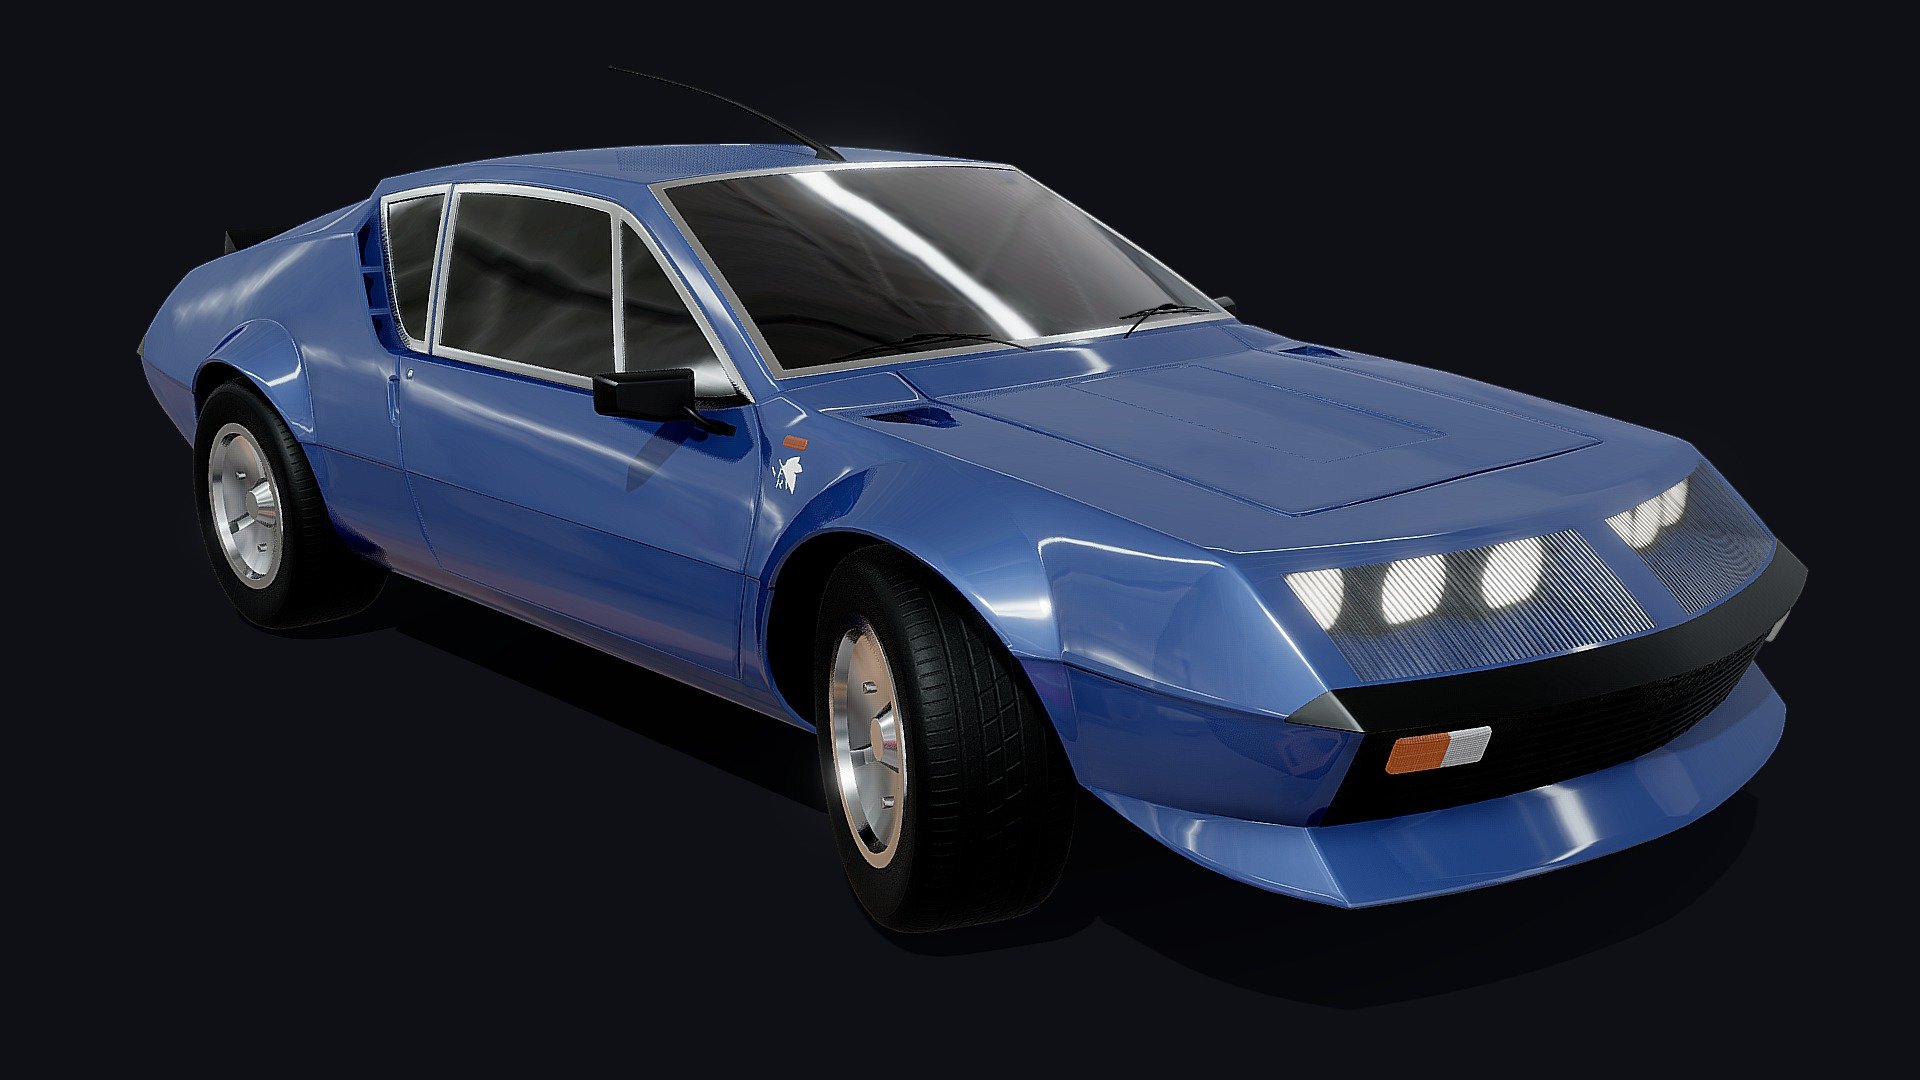 Here is a test render of the model.


Misato's car from Evanelion 3d model